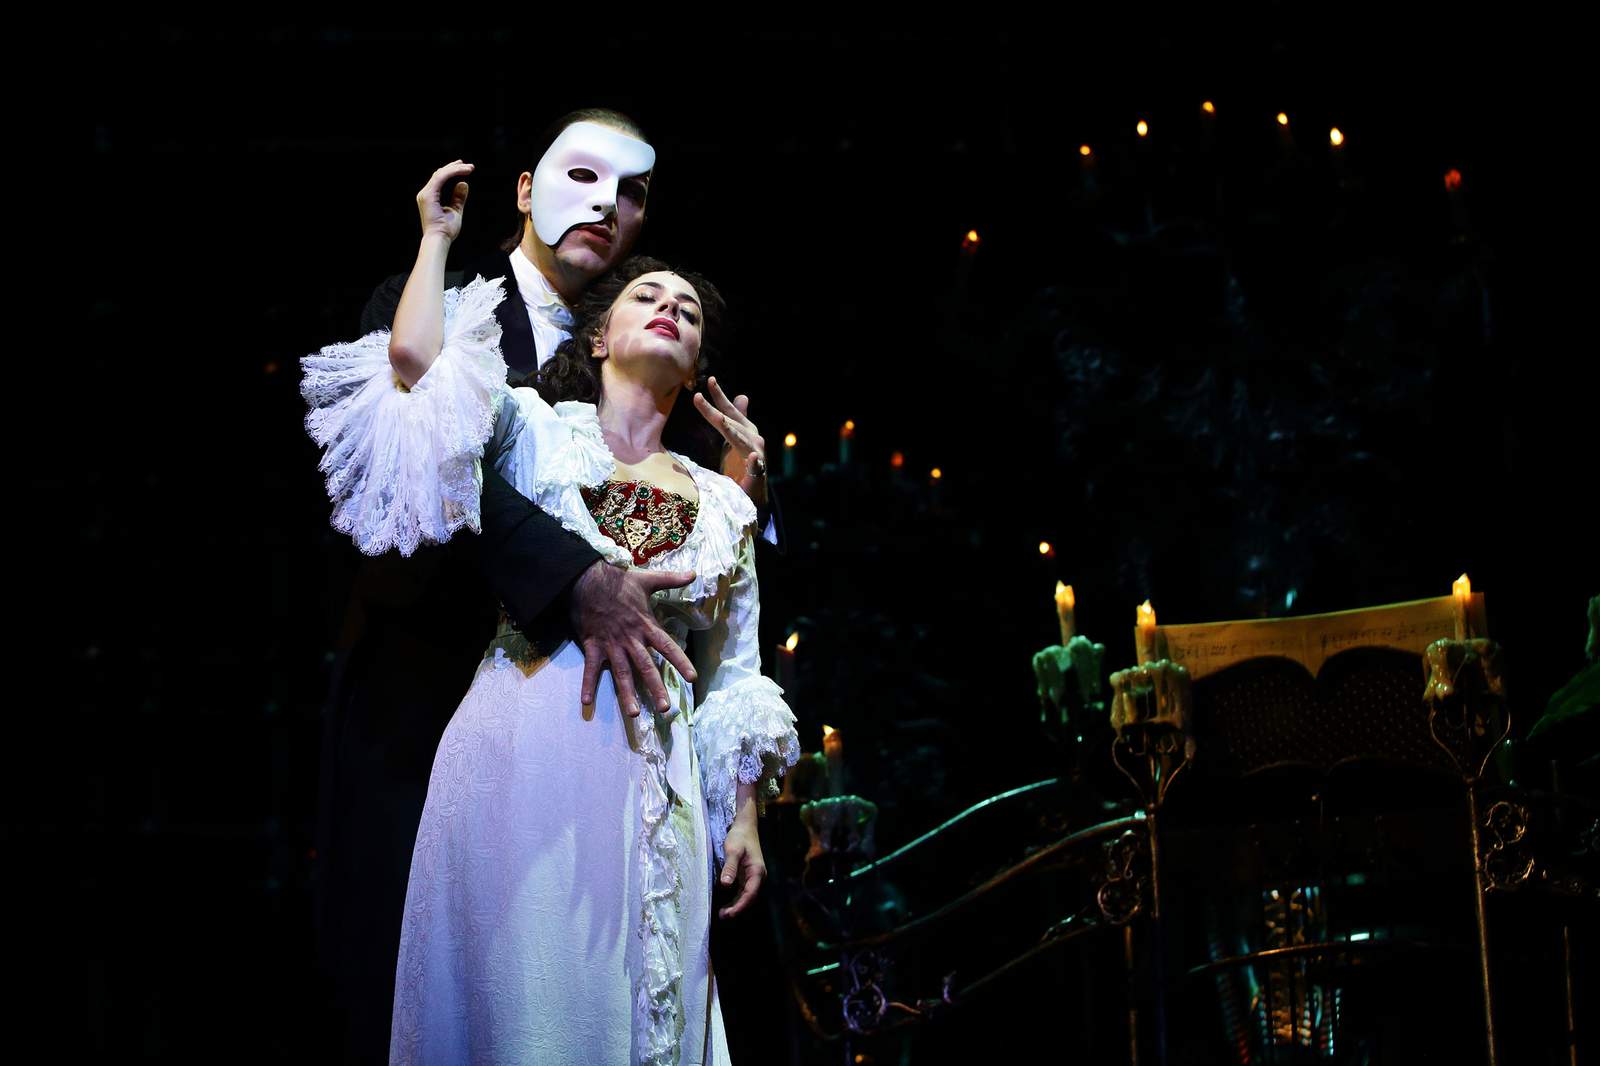 Stream ‘The Phantom of the Opera’ by Andrew Lloyd Webber for free this weekend only